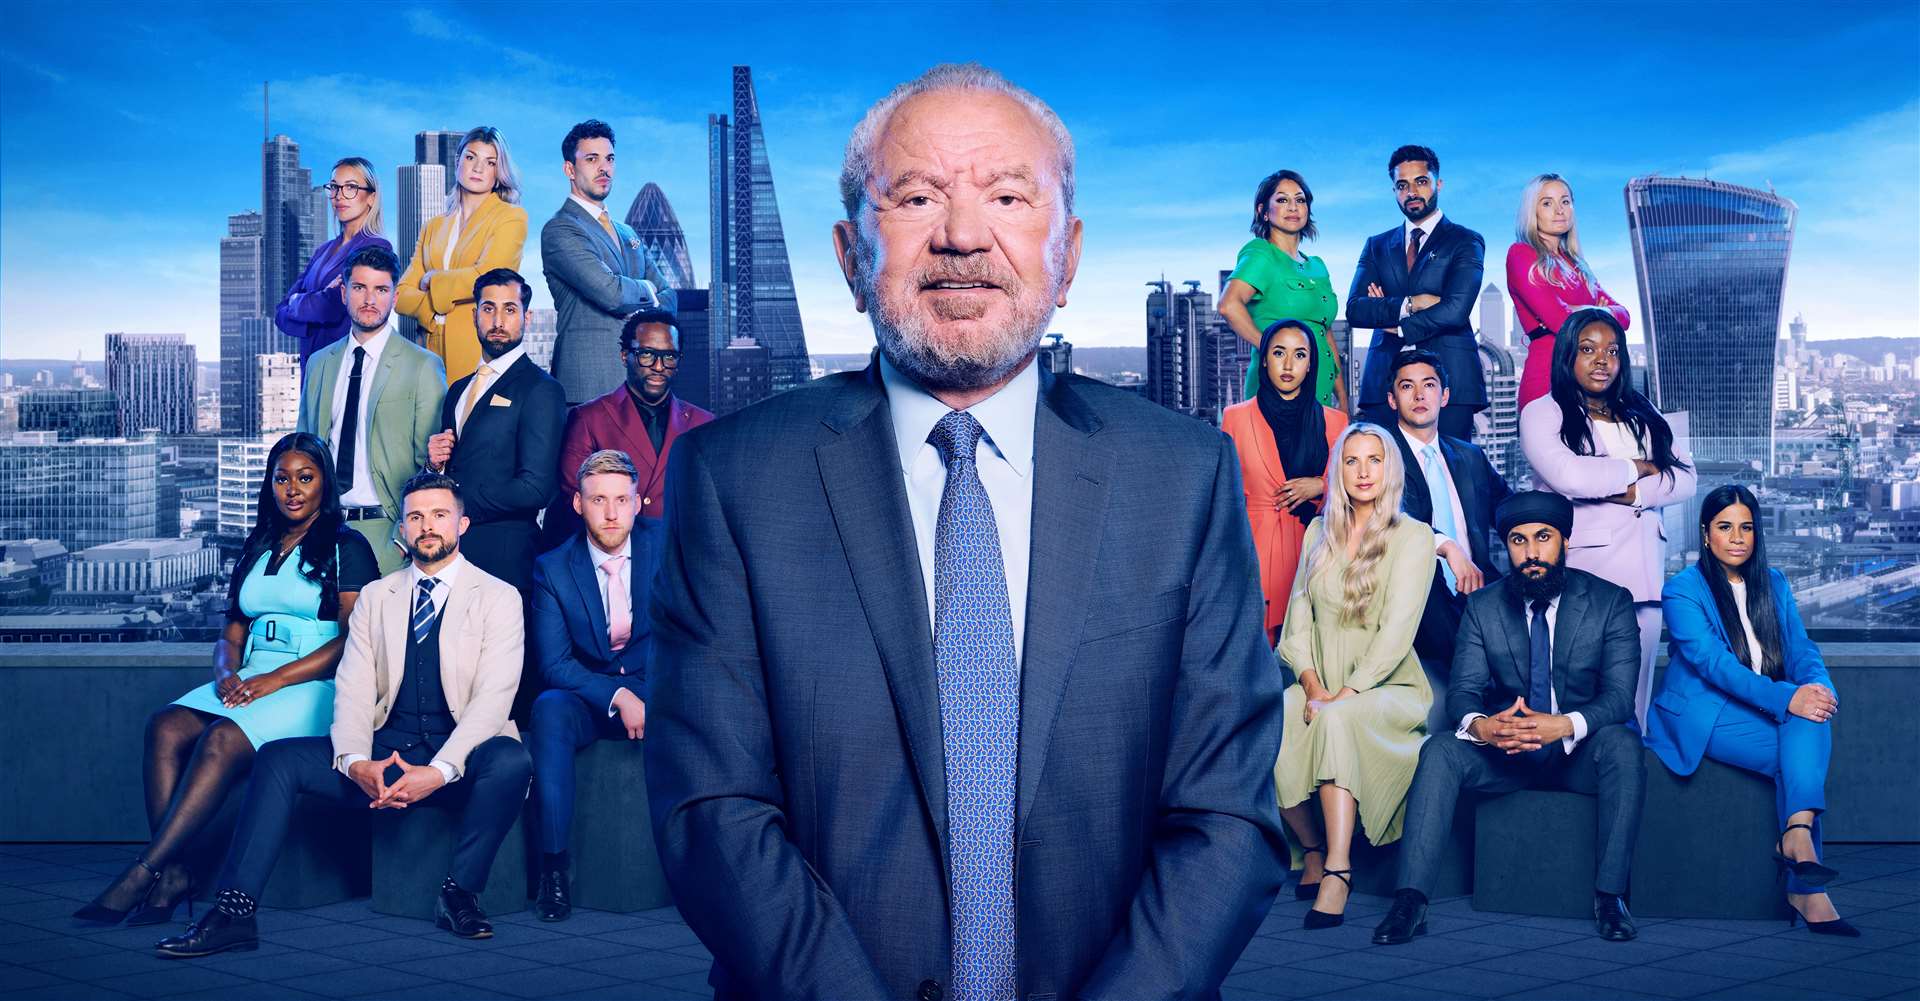 Lord Sugar and this year’s contestants Picture: BBC/Naked/Ray Burmiston/PA Wire